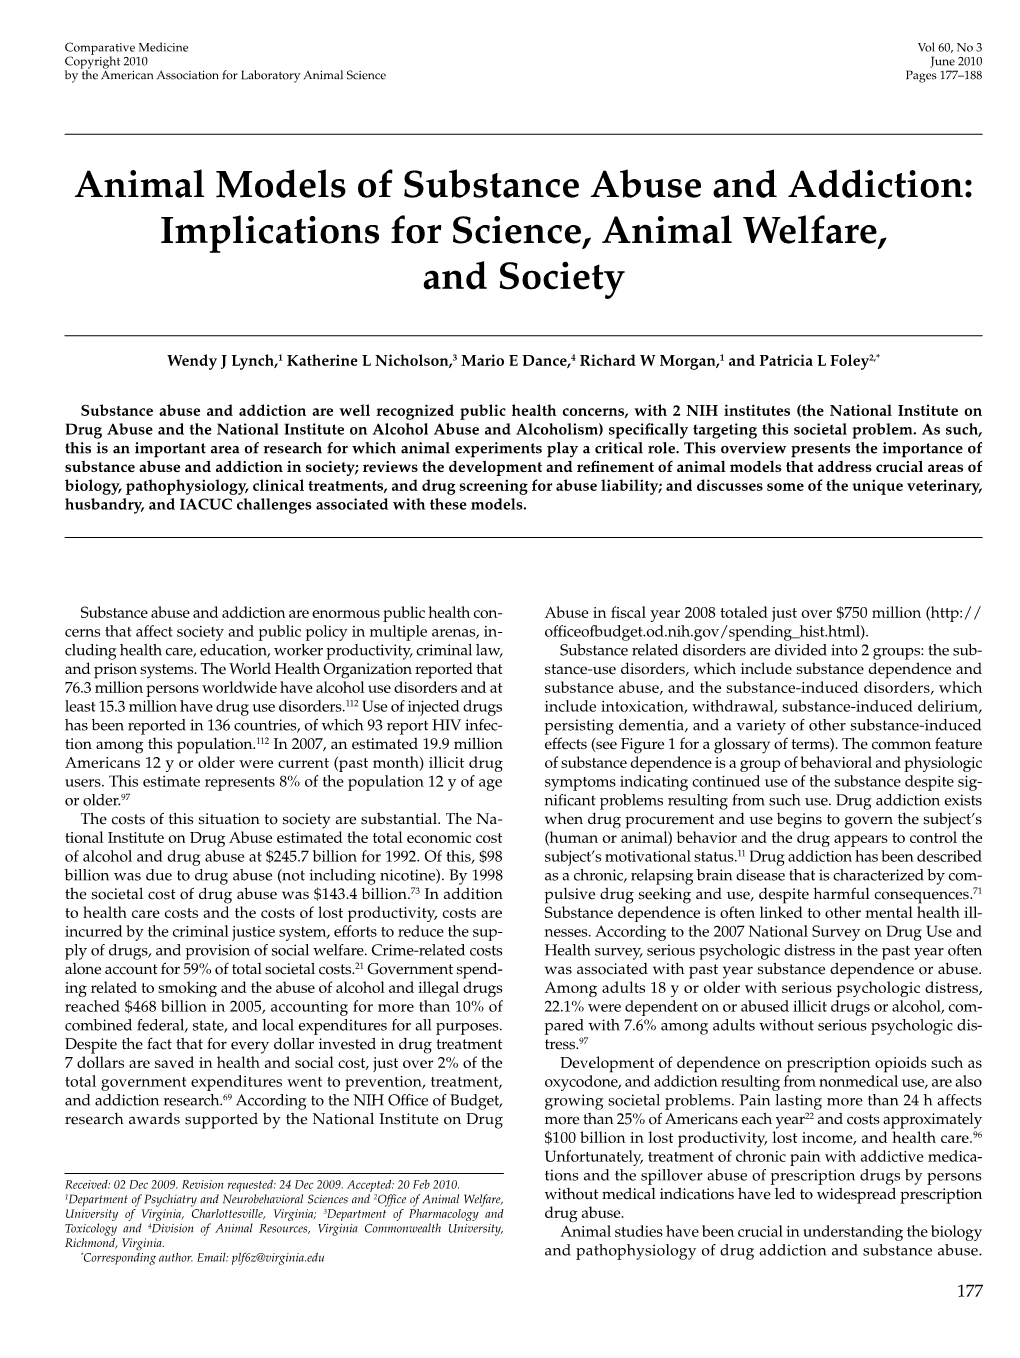 Animal Models of Substance Abuse and Addiction: Implications for Science, Animal Welfare, and Society